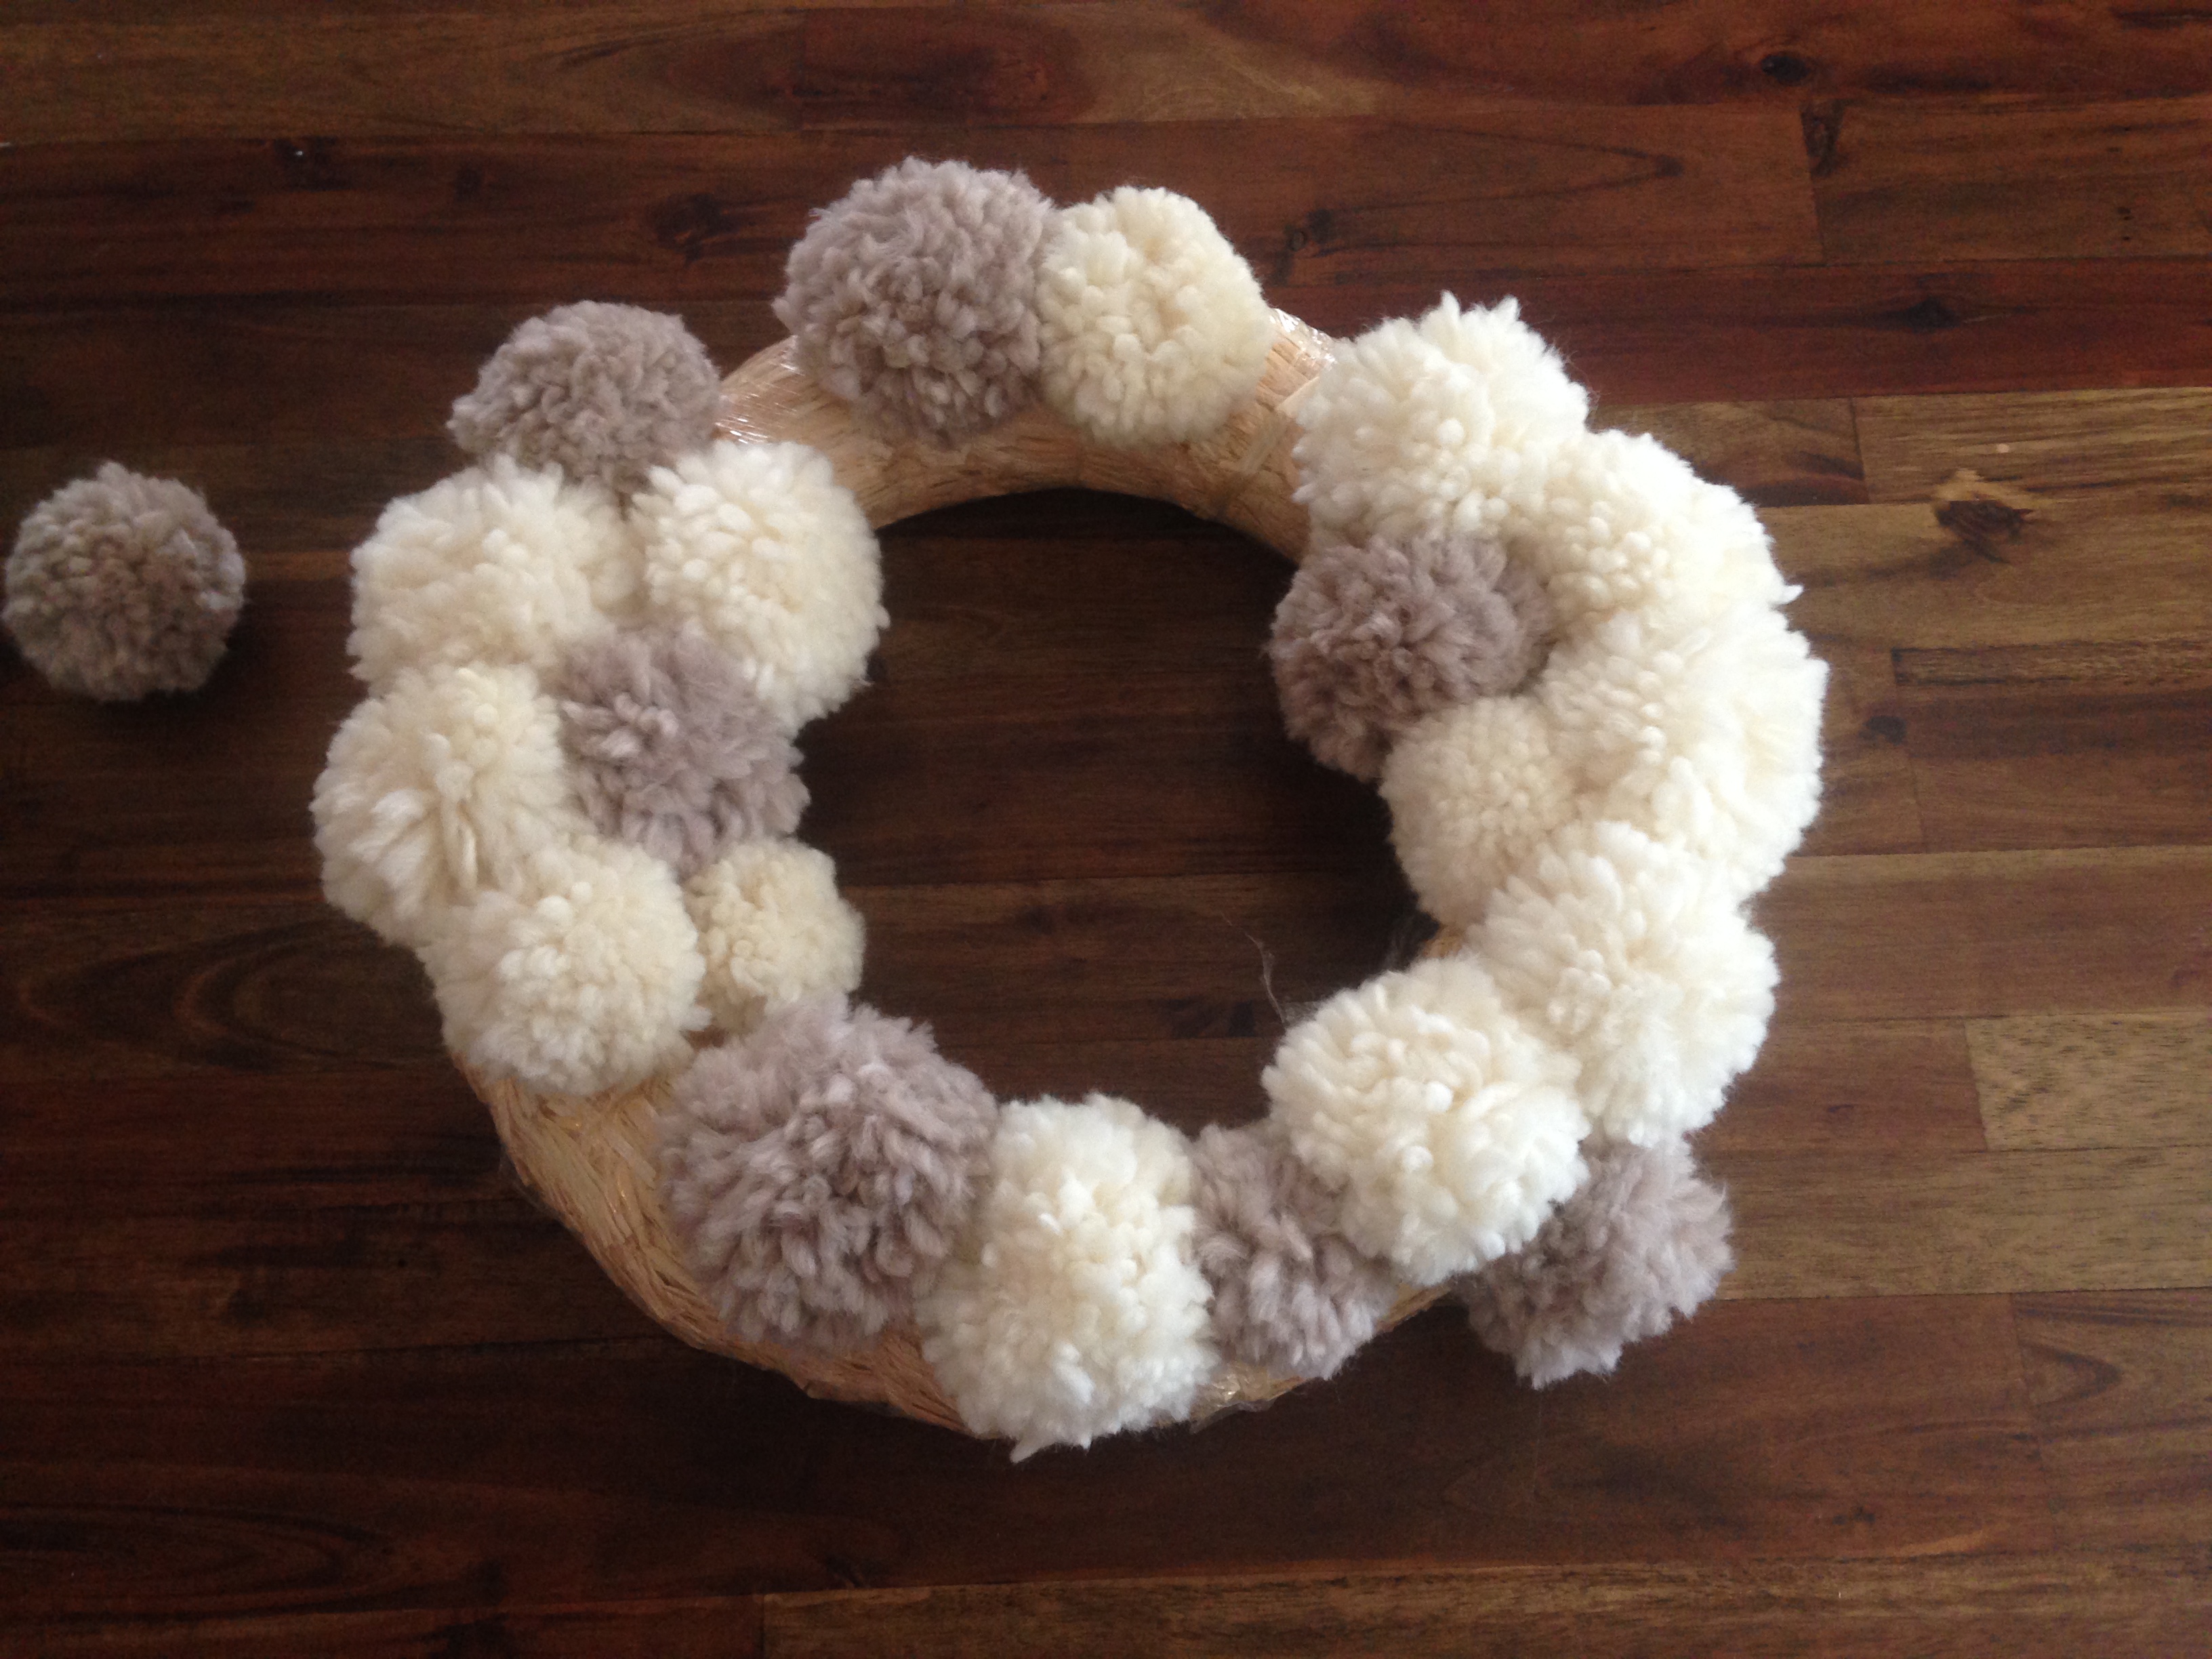 Anthropologie Inspired~ Wool Pom Pom Wreath - Clever Bloom